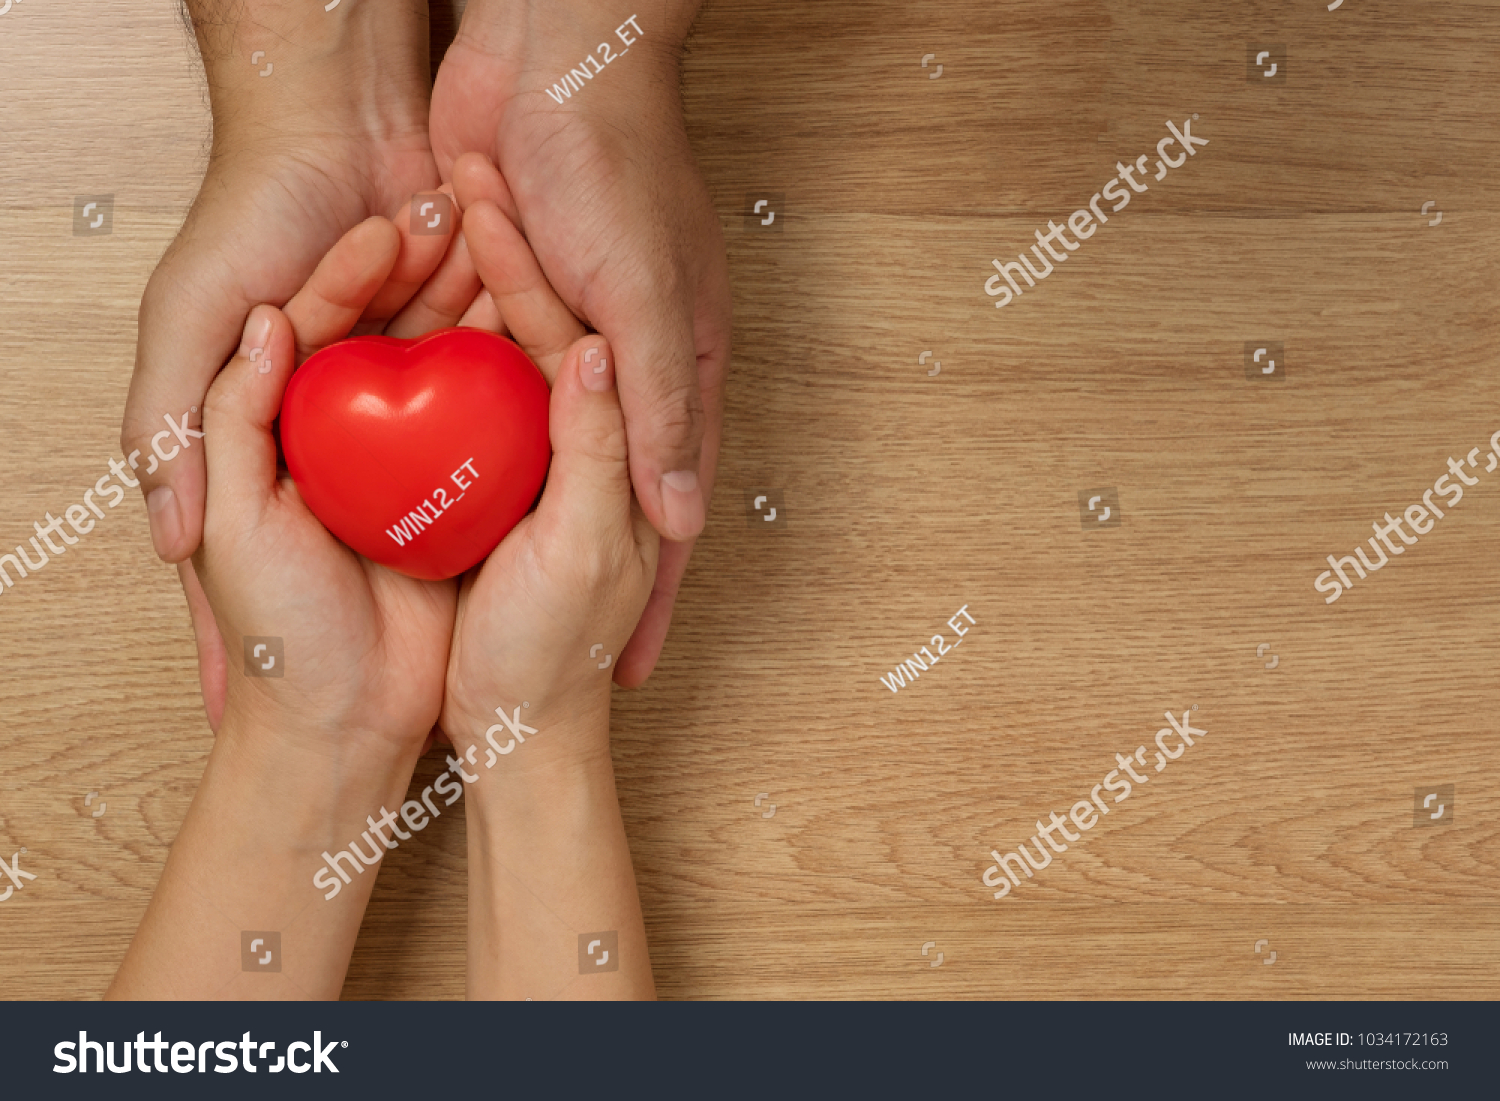 Concept of love in Valentine's Day. Hands of men and women holding red heart to give love on a wooden floor. #1034172163